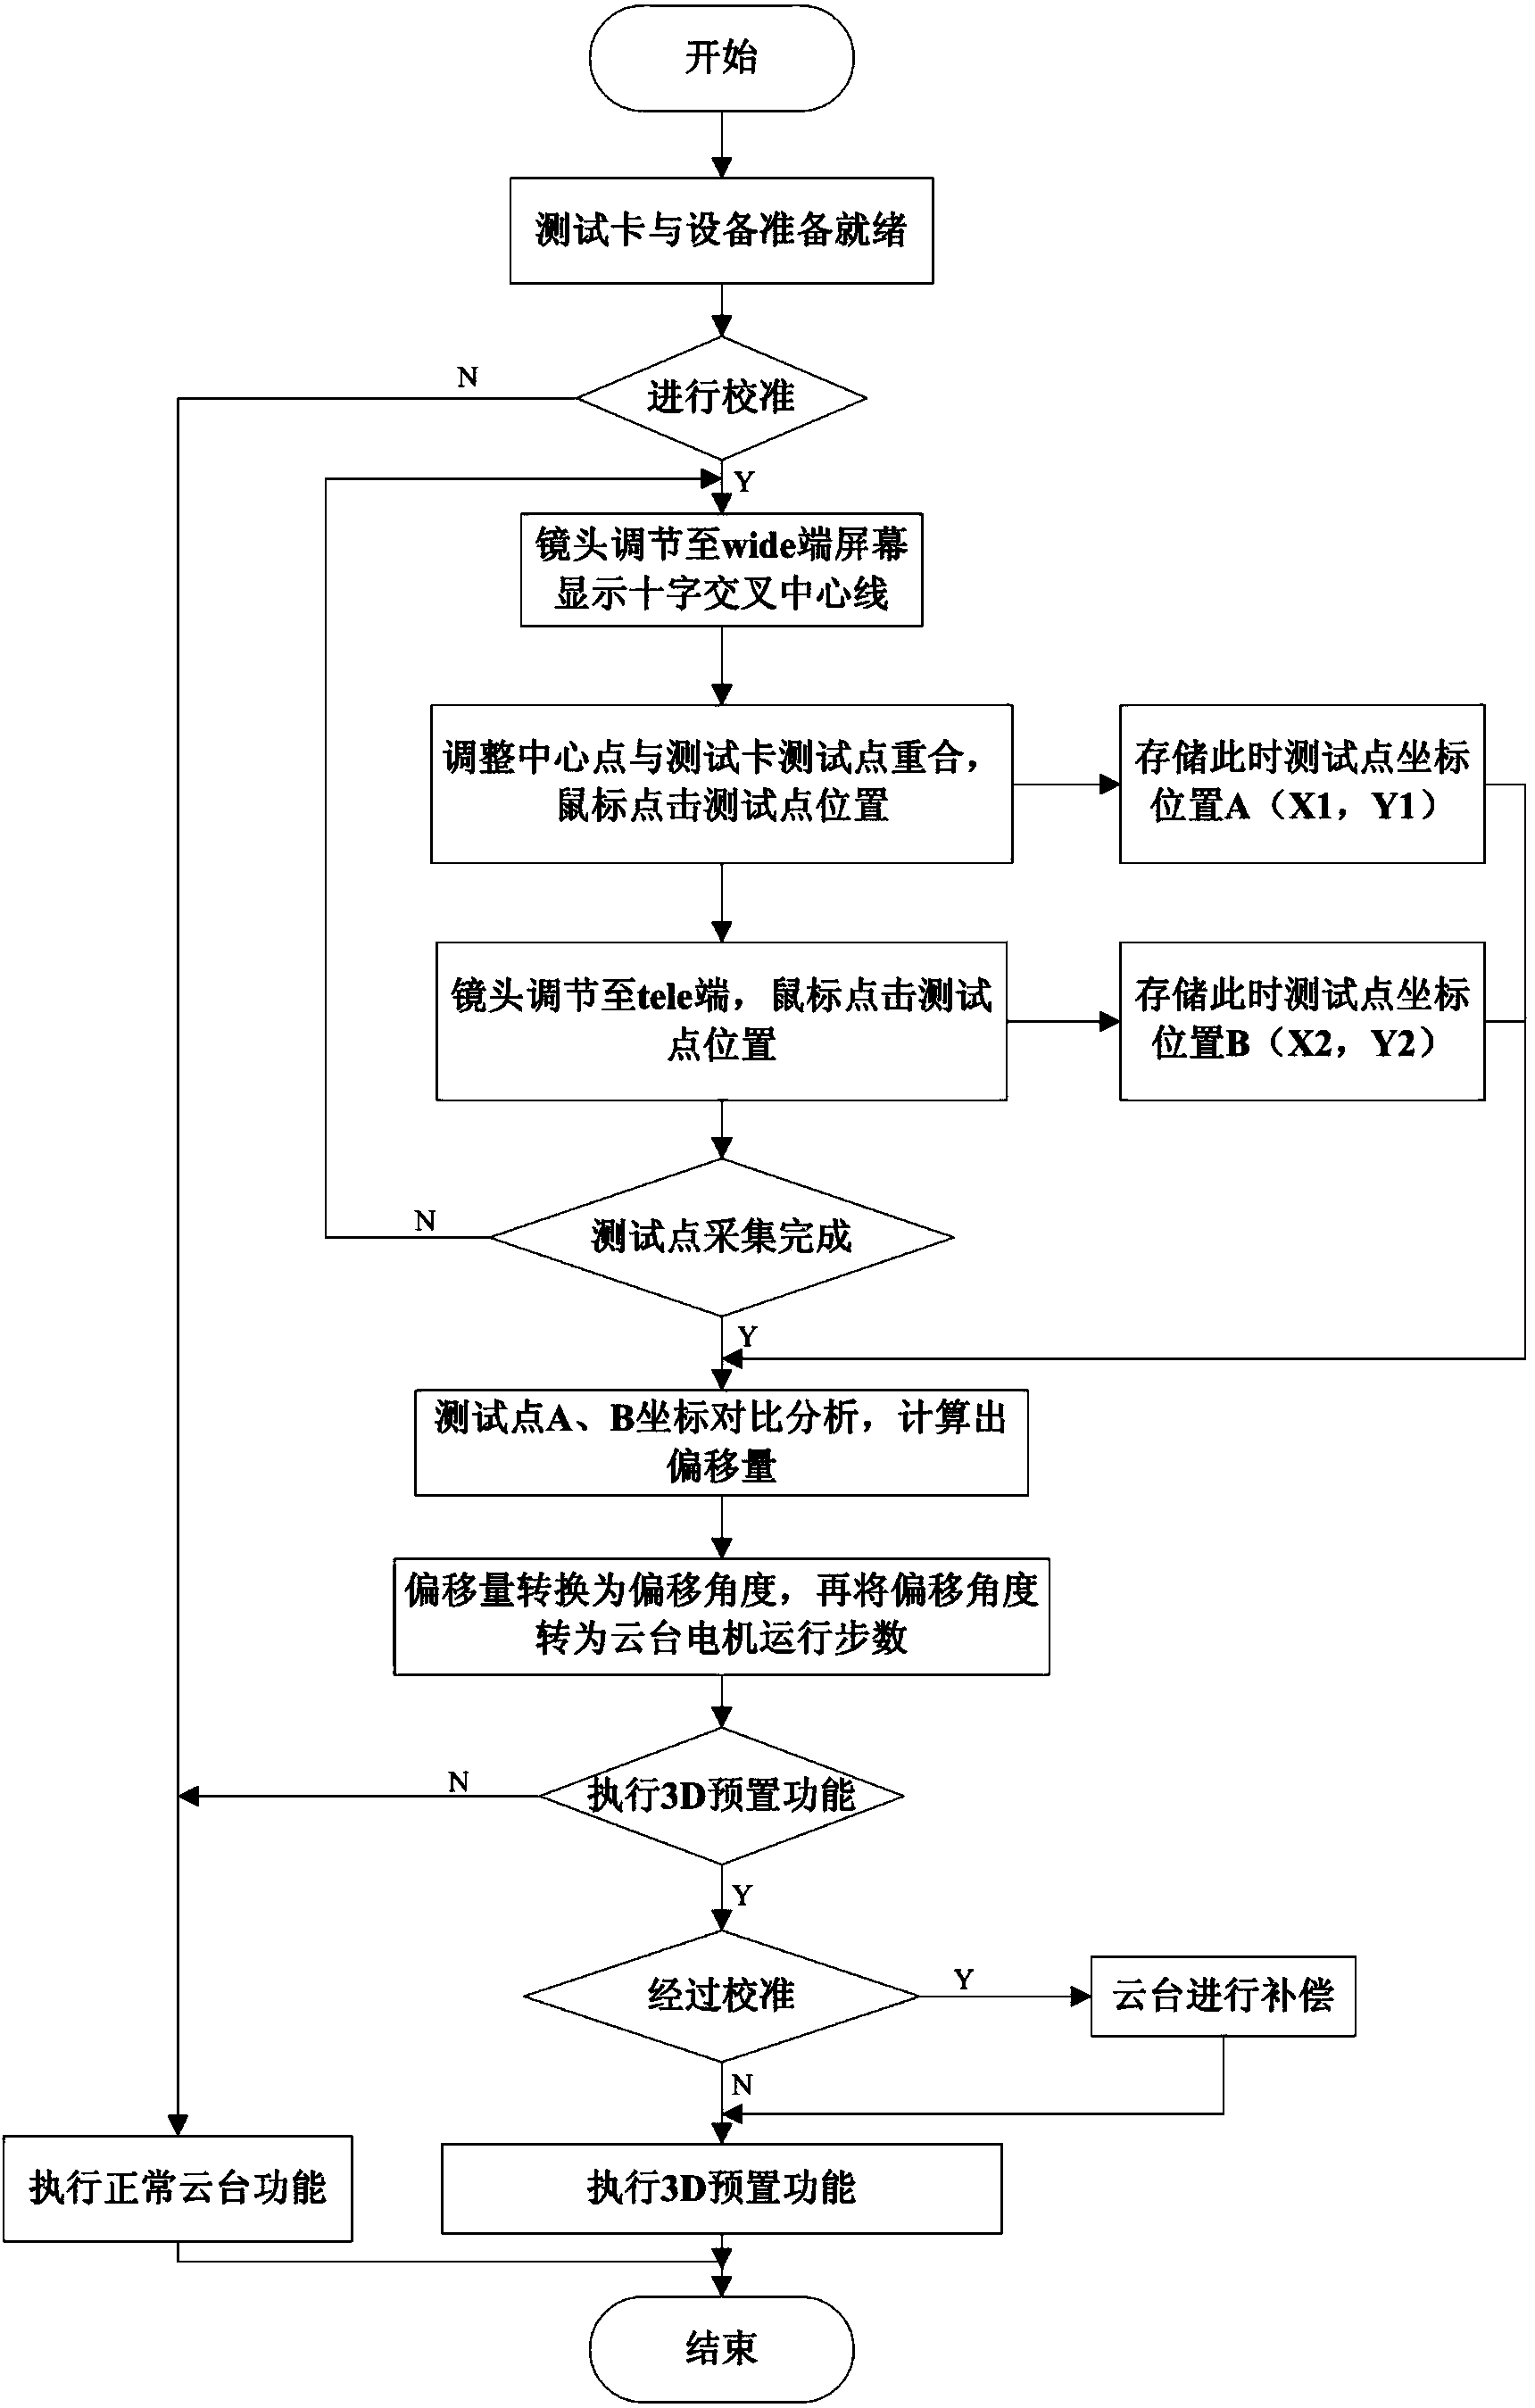 Method and device for achieving 3D preset accurate linkage between camera and pan-tilt